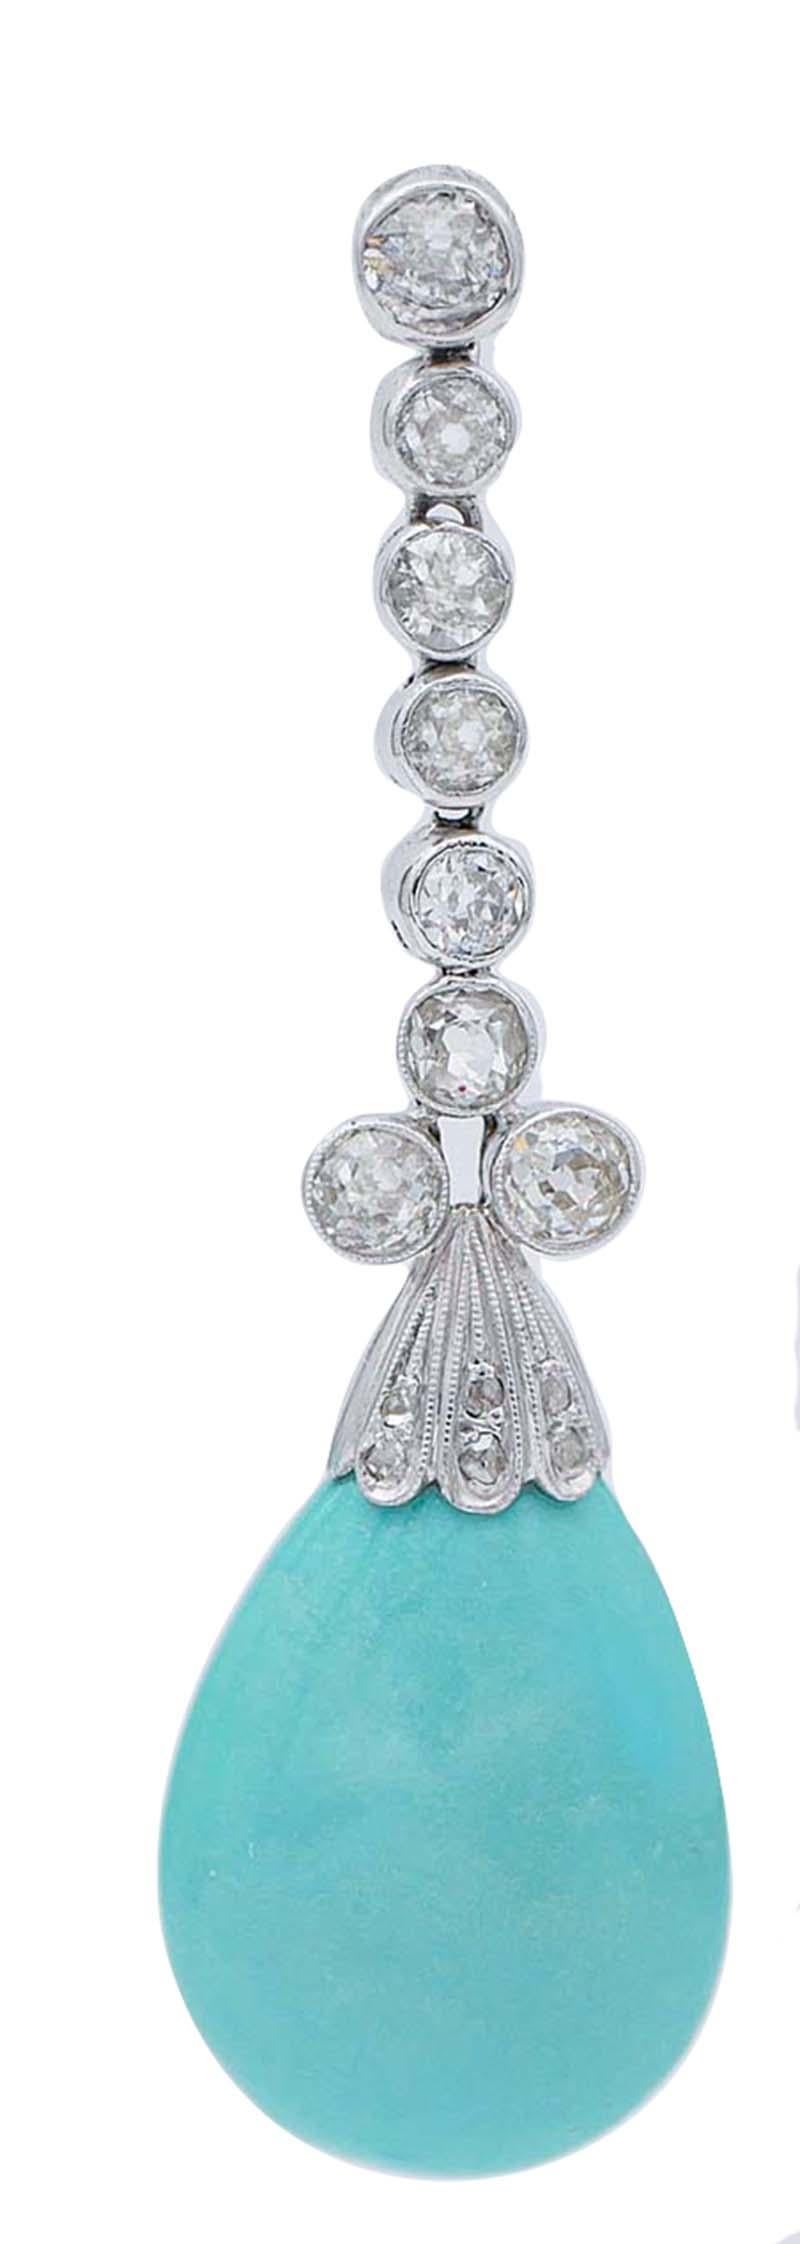 SHIPPING POLICY: 
No additional costs will be added to this order. 
Shipping costs will be totally covered by the seller (customs duties included).

Elegant dangle earrings in 9 karat white gold and silver structure mounted with a rain of diamonds